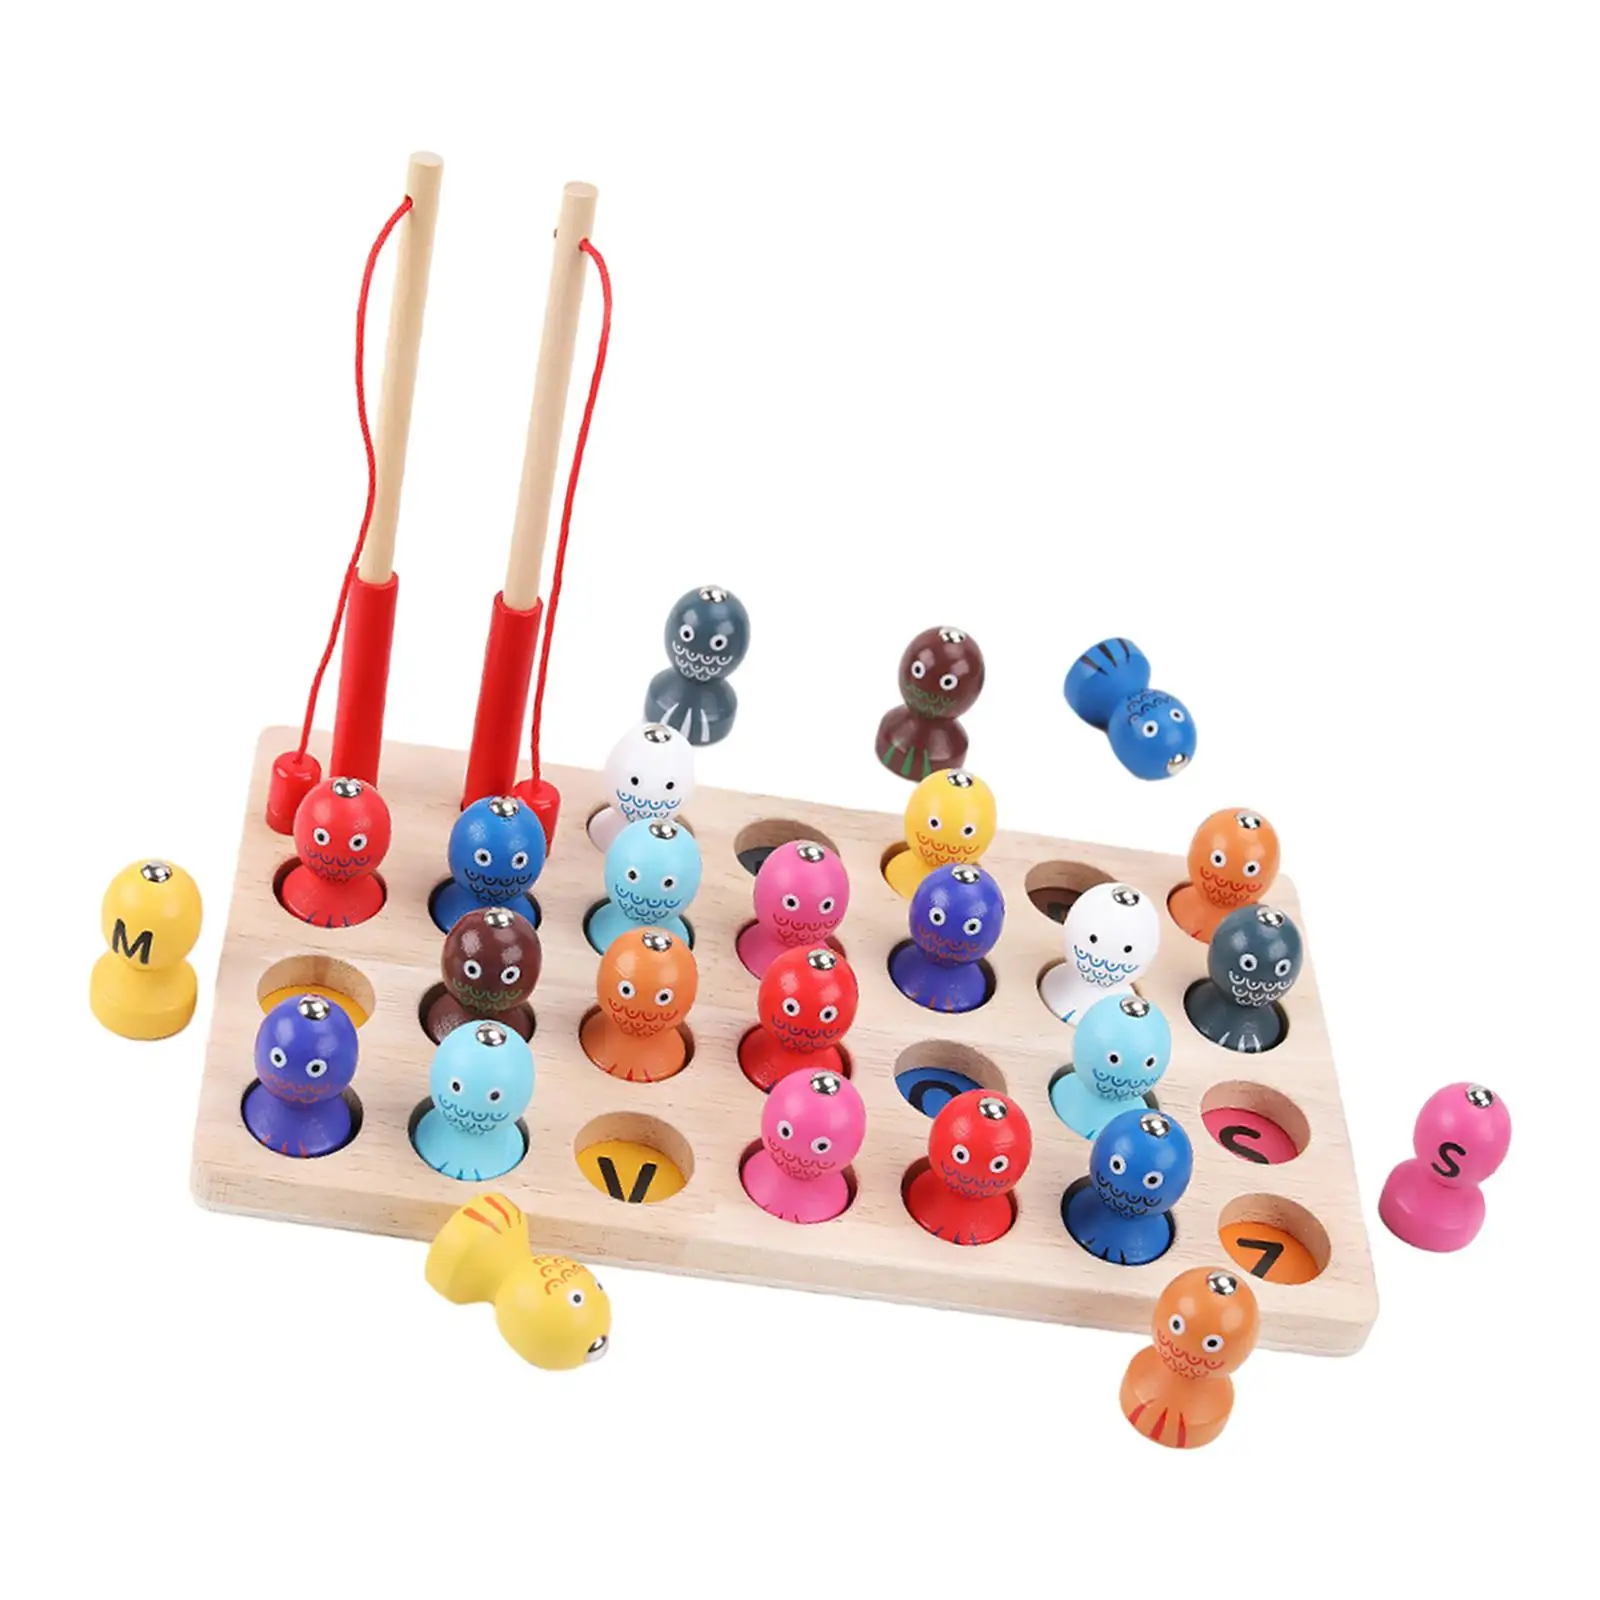 Ame preschool activity letters cognition 26 magnetic fishes with 2 poles wooden toy for thumb200